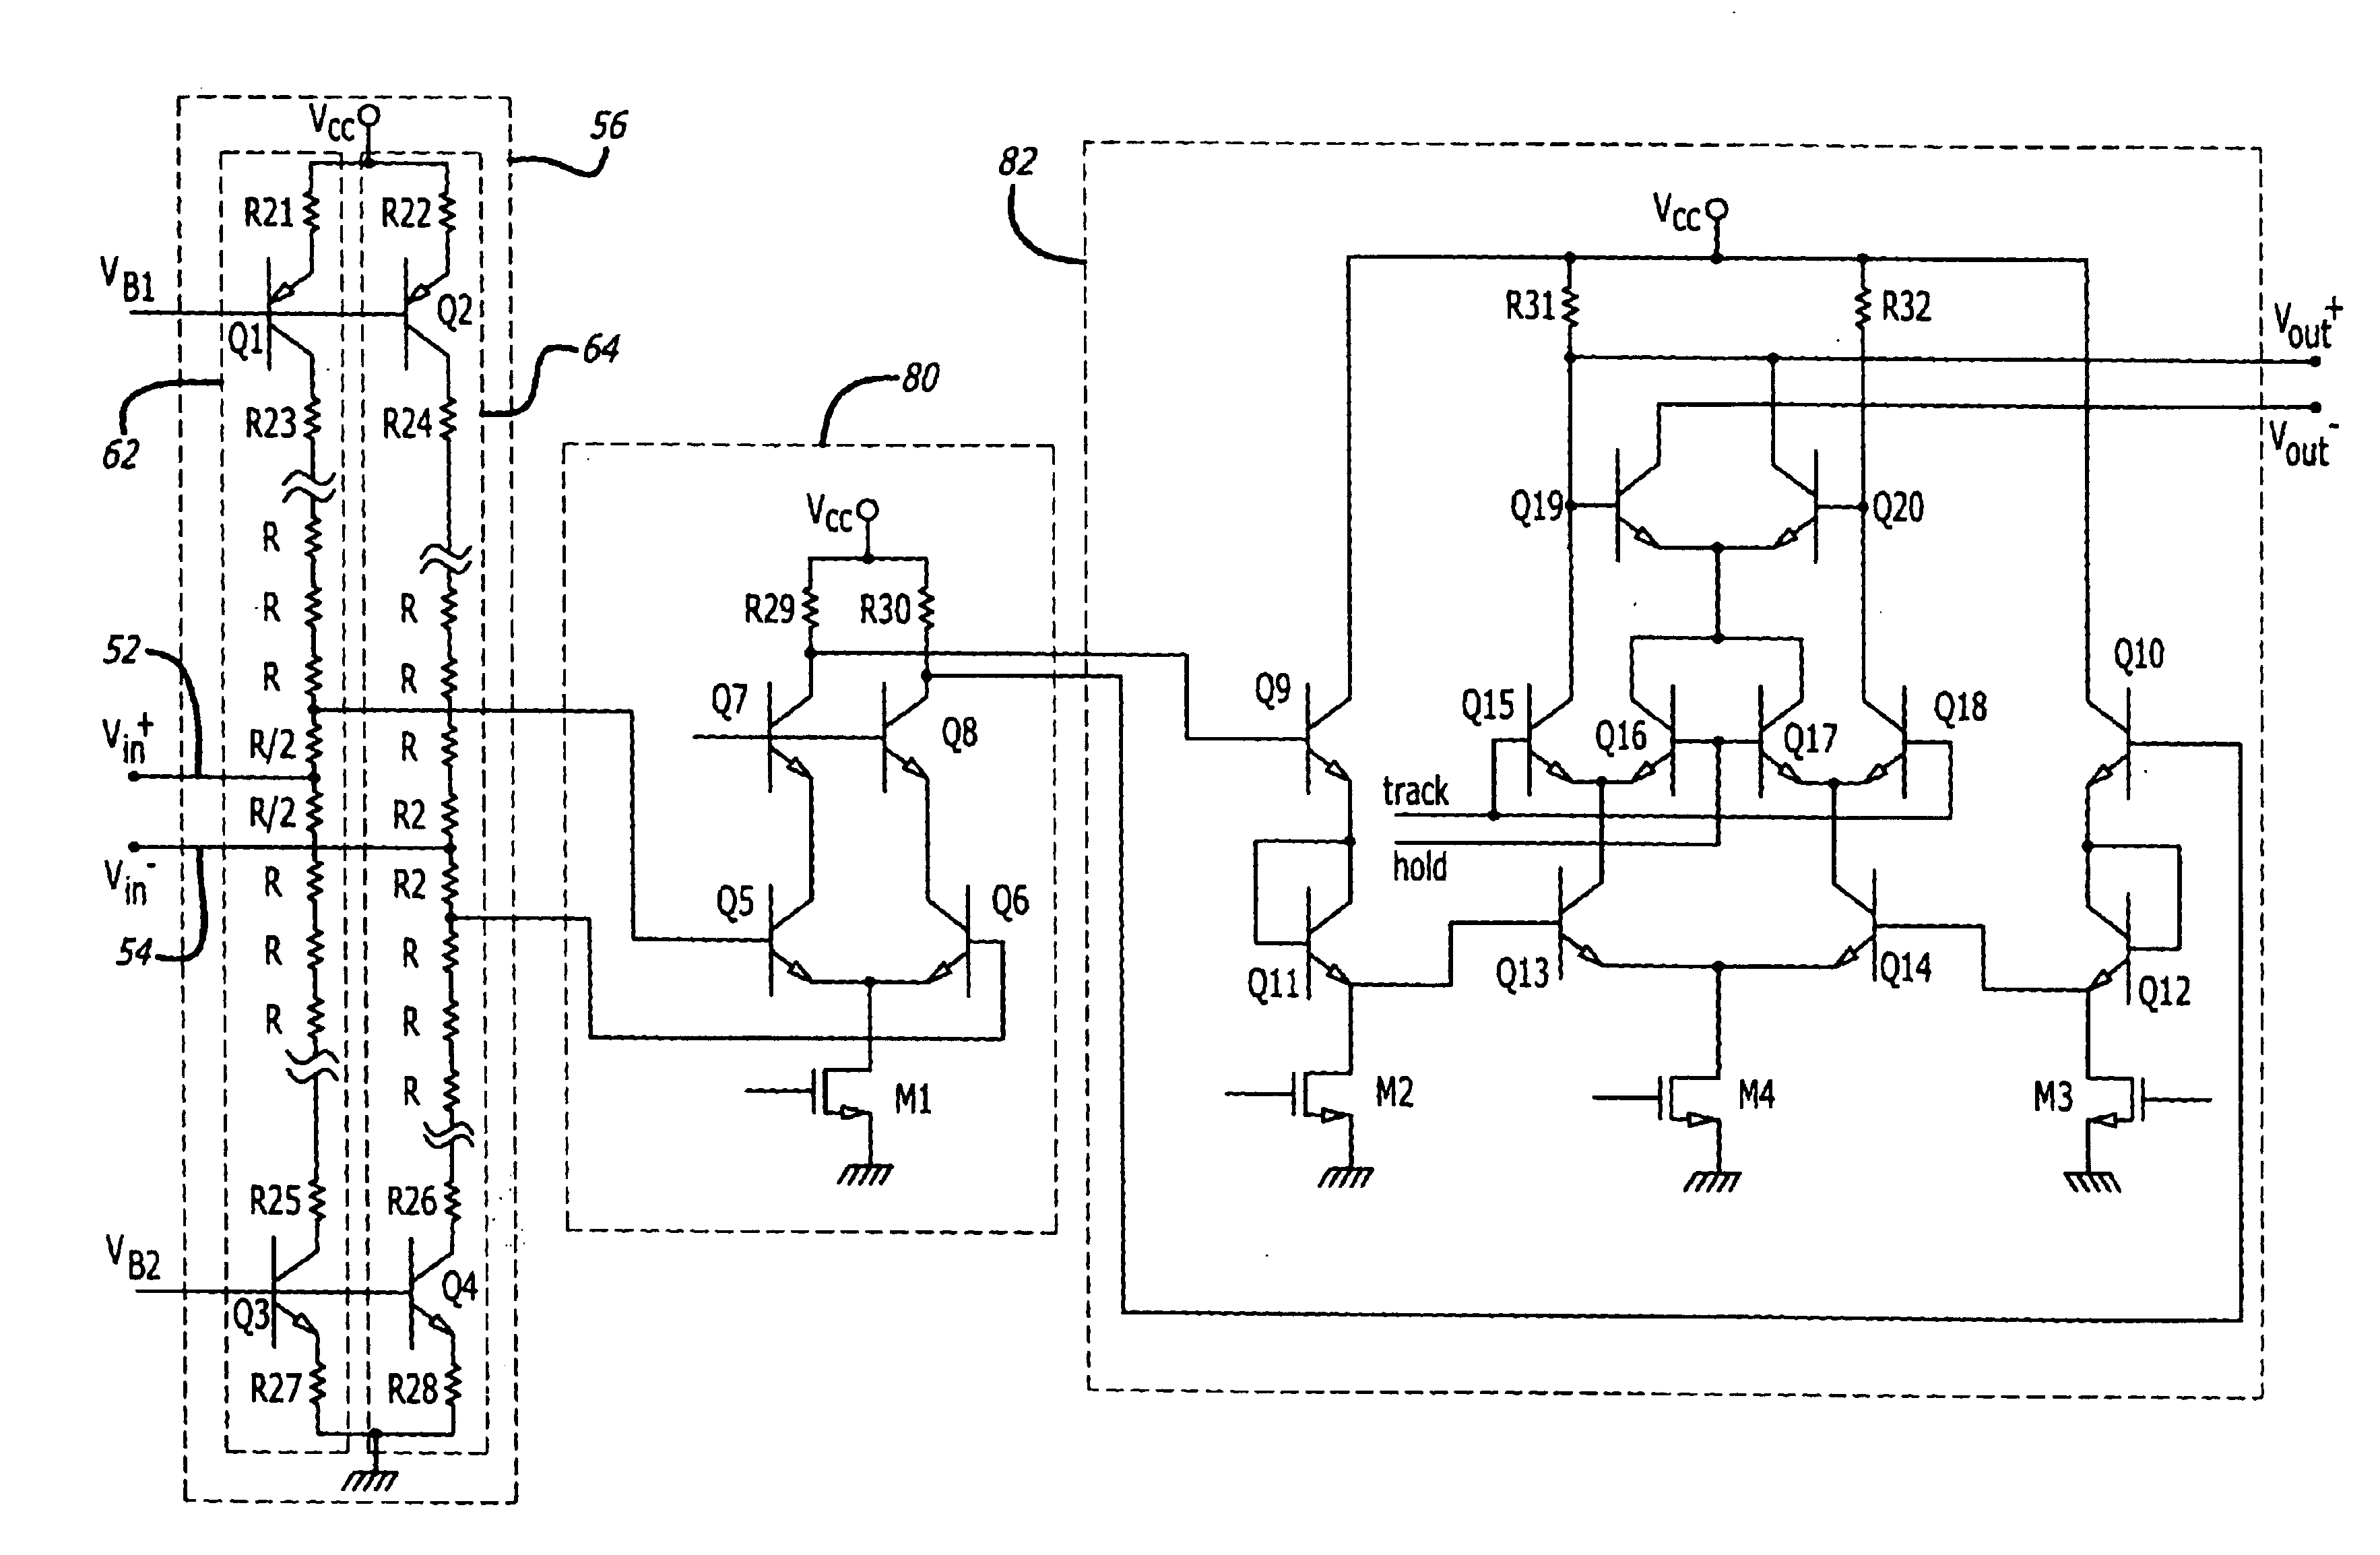 Resistive ladder, summing node circuit, and trimming method for a subranging analog to digital converter